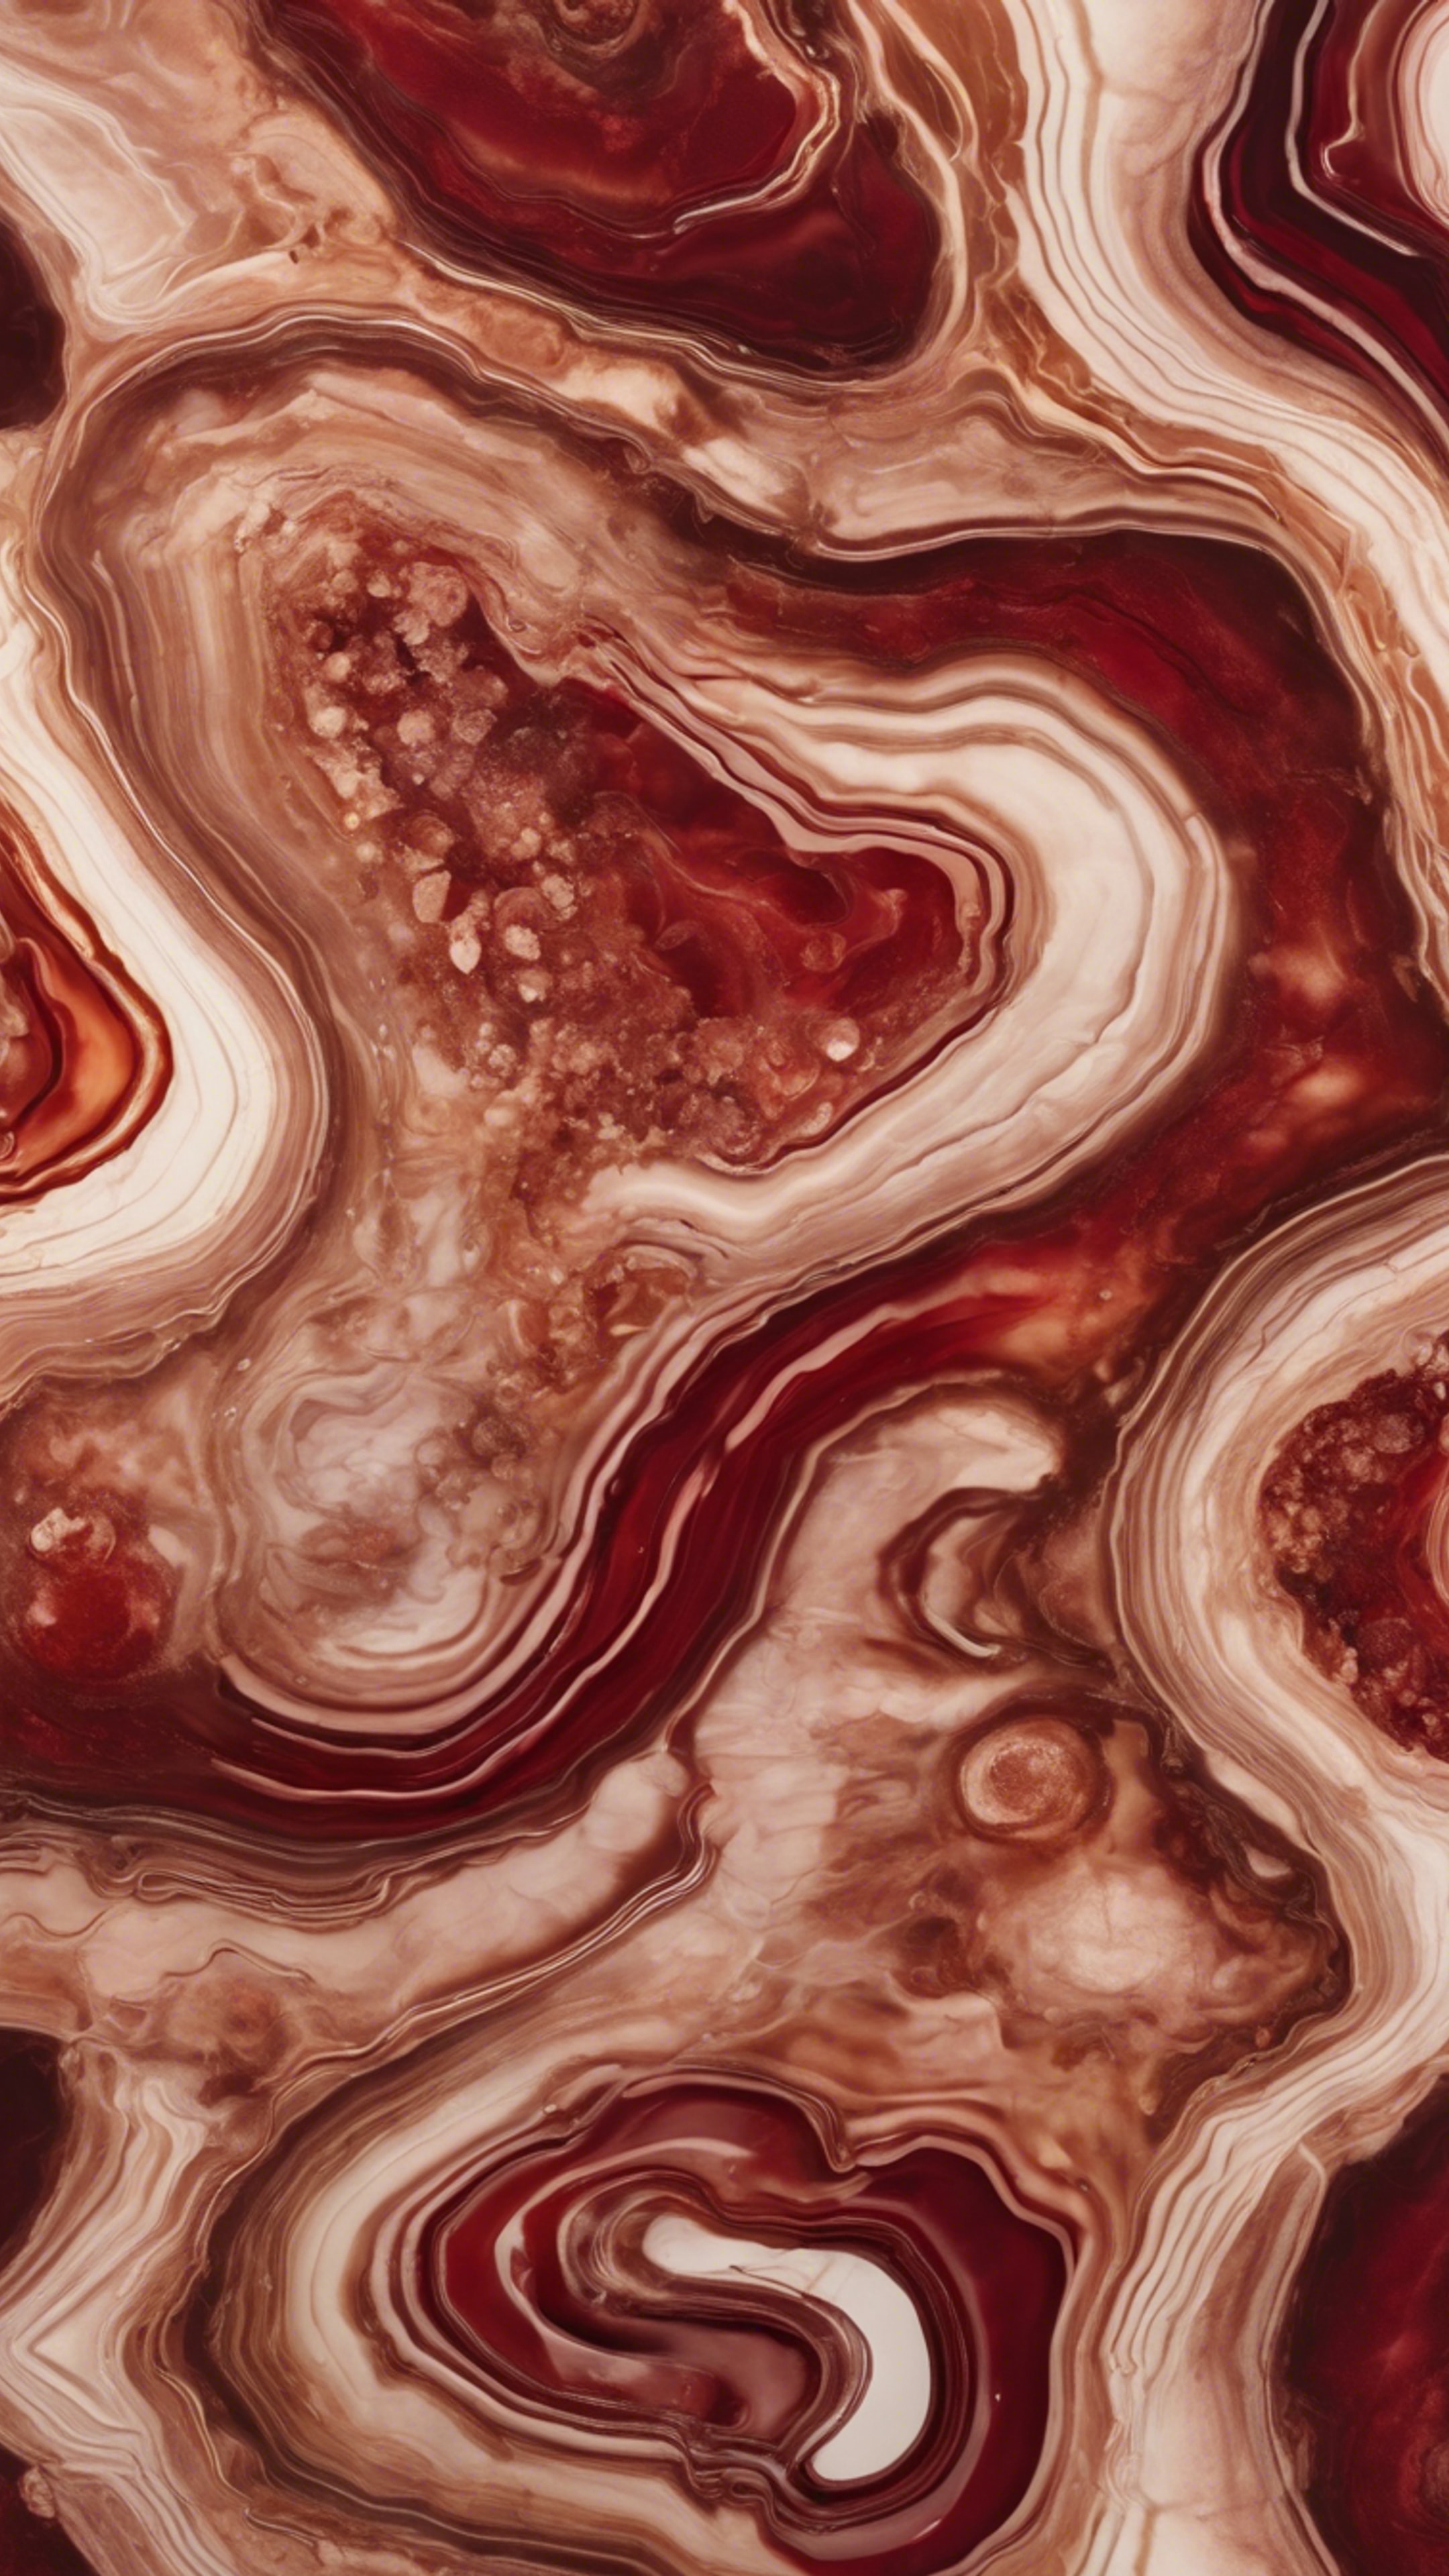 Grungy agate swirls in garnet red and sepia tones, forming a fascinating, abstract pattern. Kertas dinding[bb48f1c473e4473bbd4a]